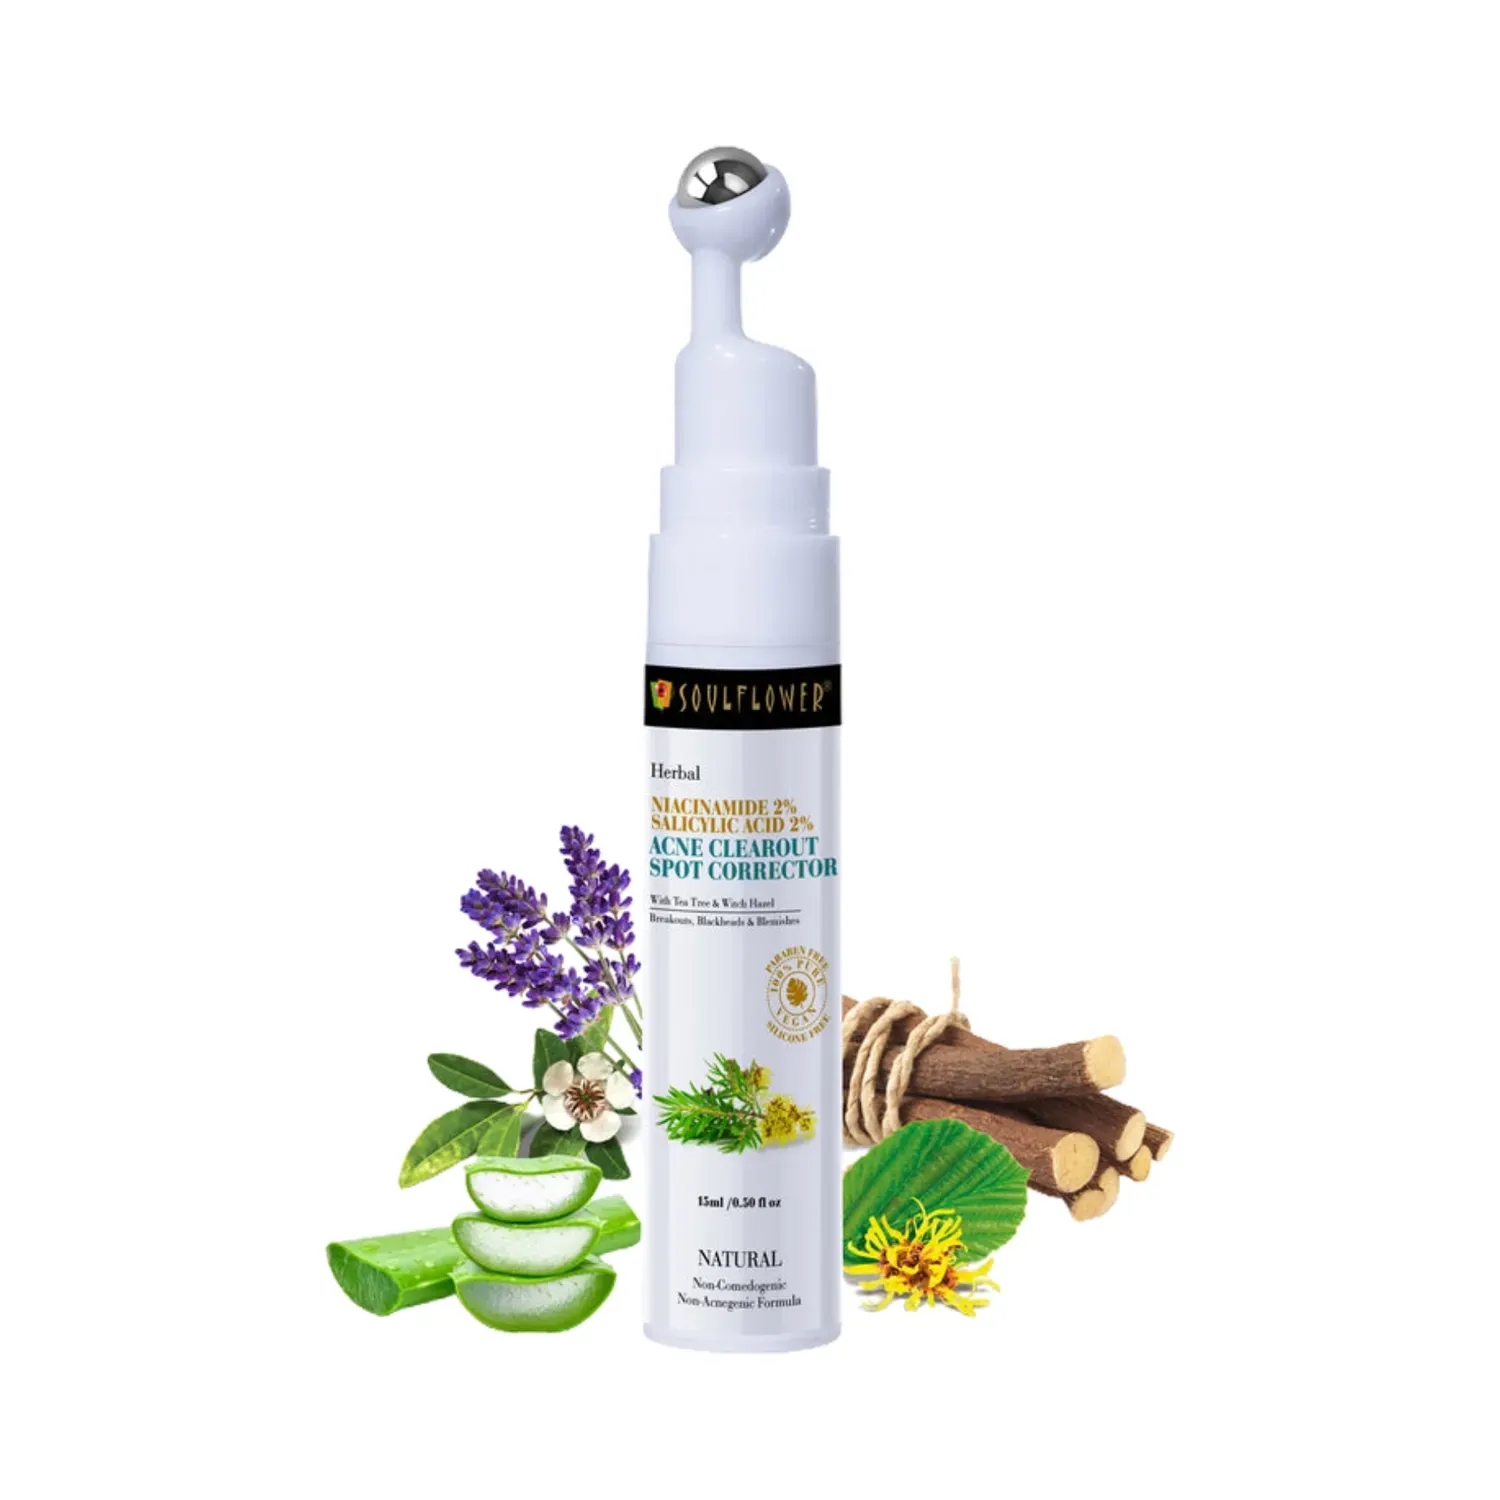 Soulflower | Soulflower Herbal Acne Clearout Spot Corrector Face Serum - (15g)